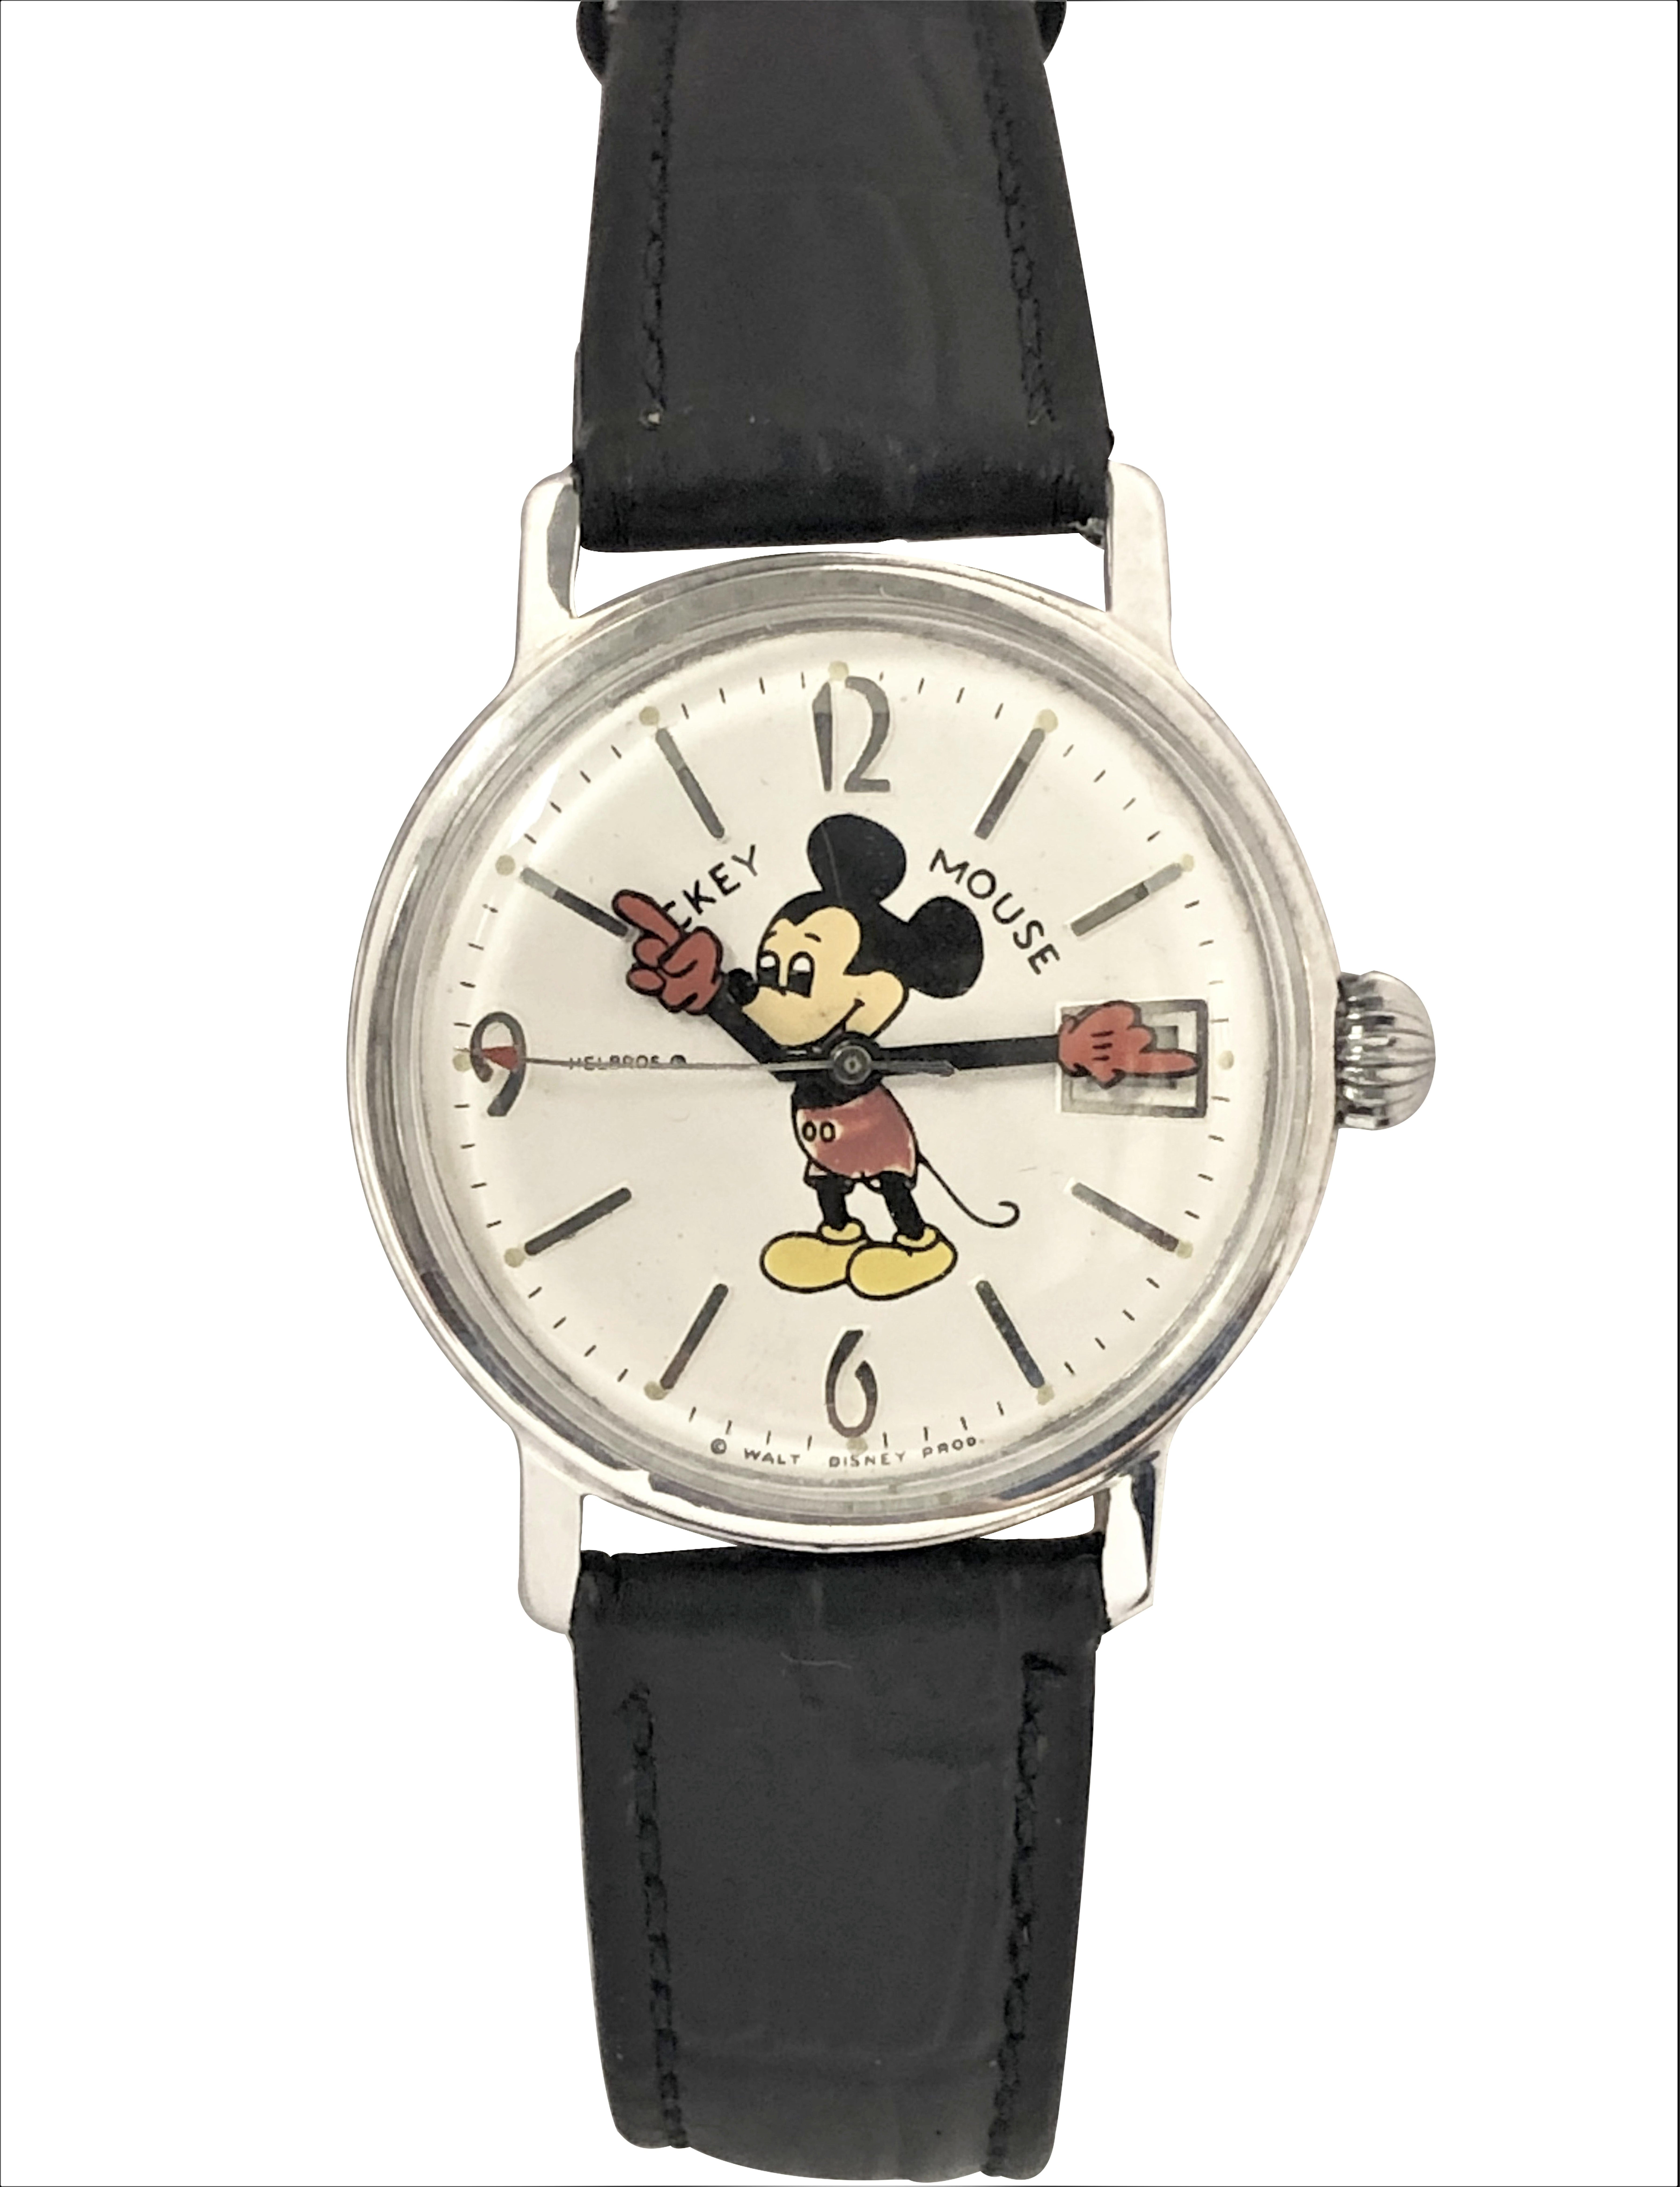 Circa 1970s Helbros Mickey Mouse Wrist watch, 33 M.M. Stainless Steel 2 Piece case with Water Resistant back. 17 Jewel Mechanical, manual wind movement. Silver white dial with colorful Enamel Mickey, Enamel animated Glove hands, a sweep seconds hand